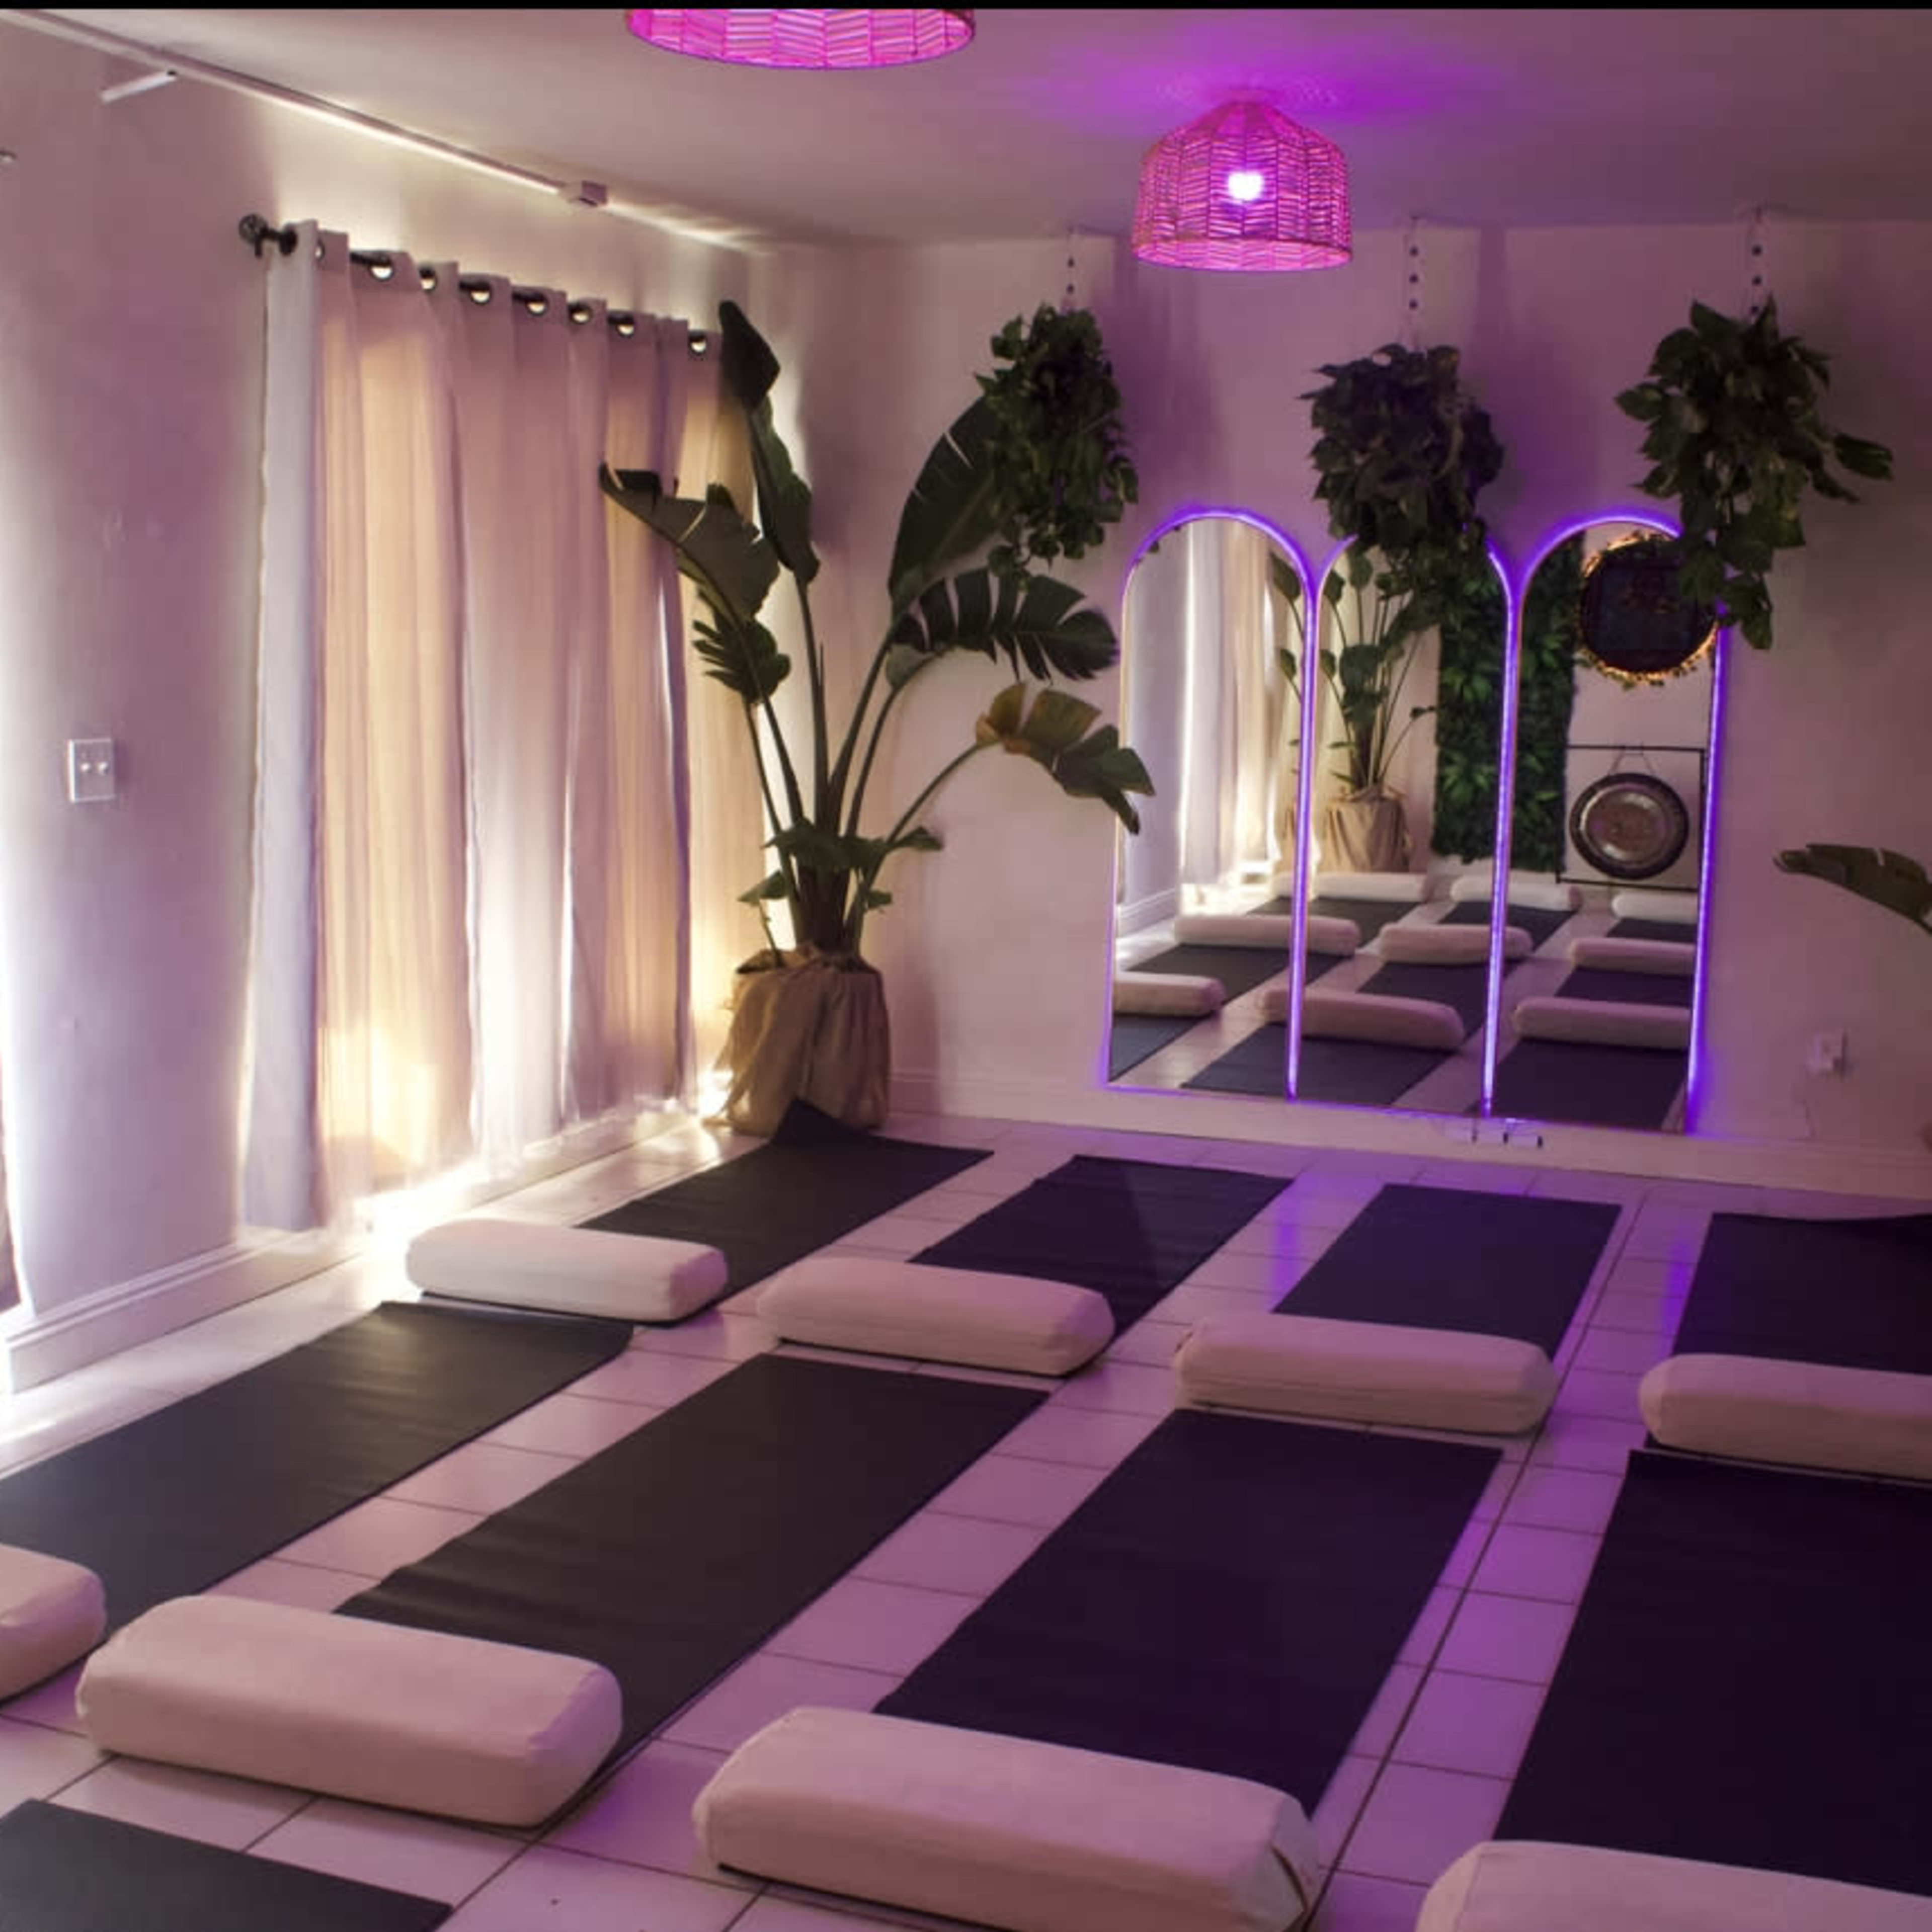 The BEST 10 Yoga Studio spaces for rent in Los Angeles, CA